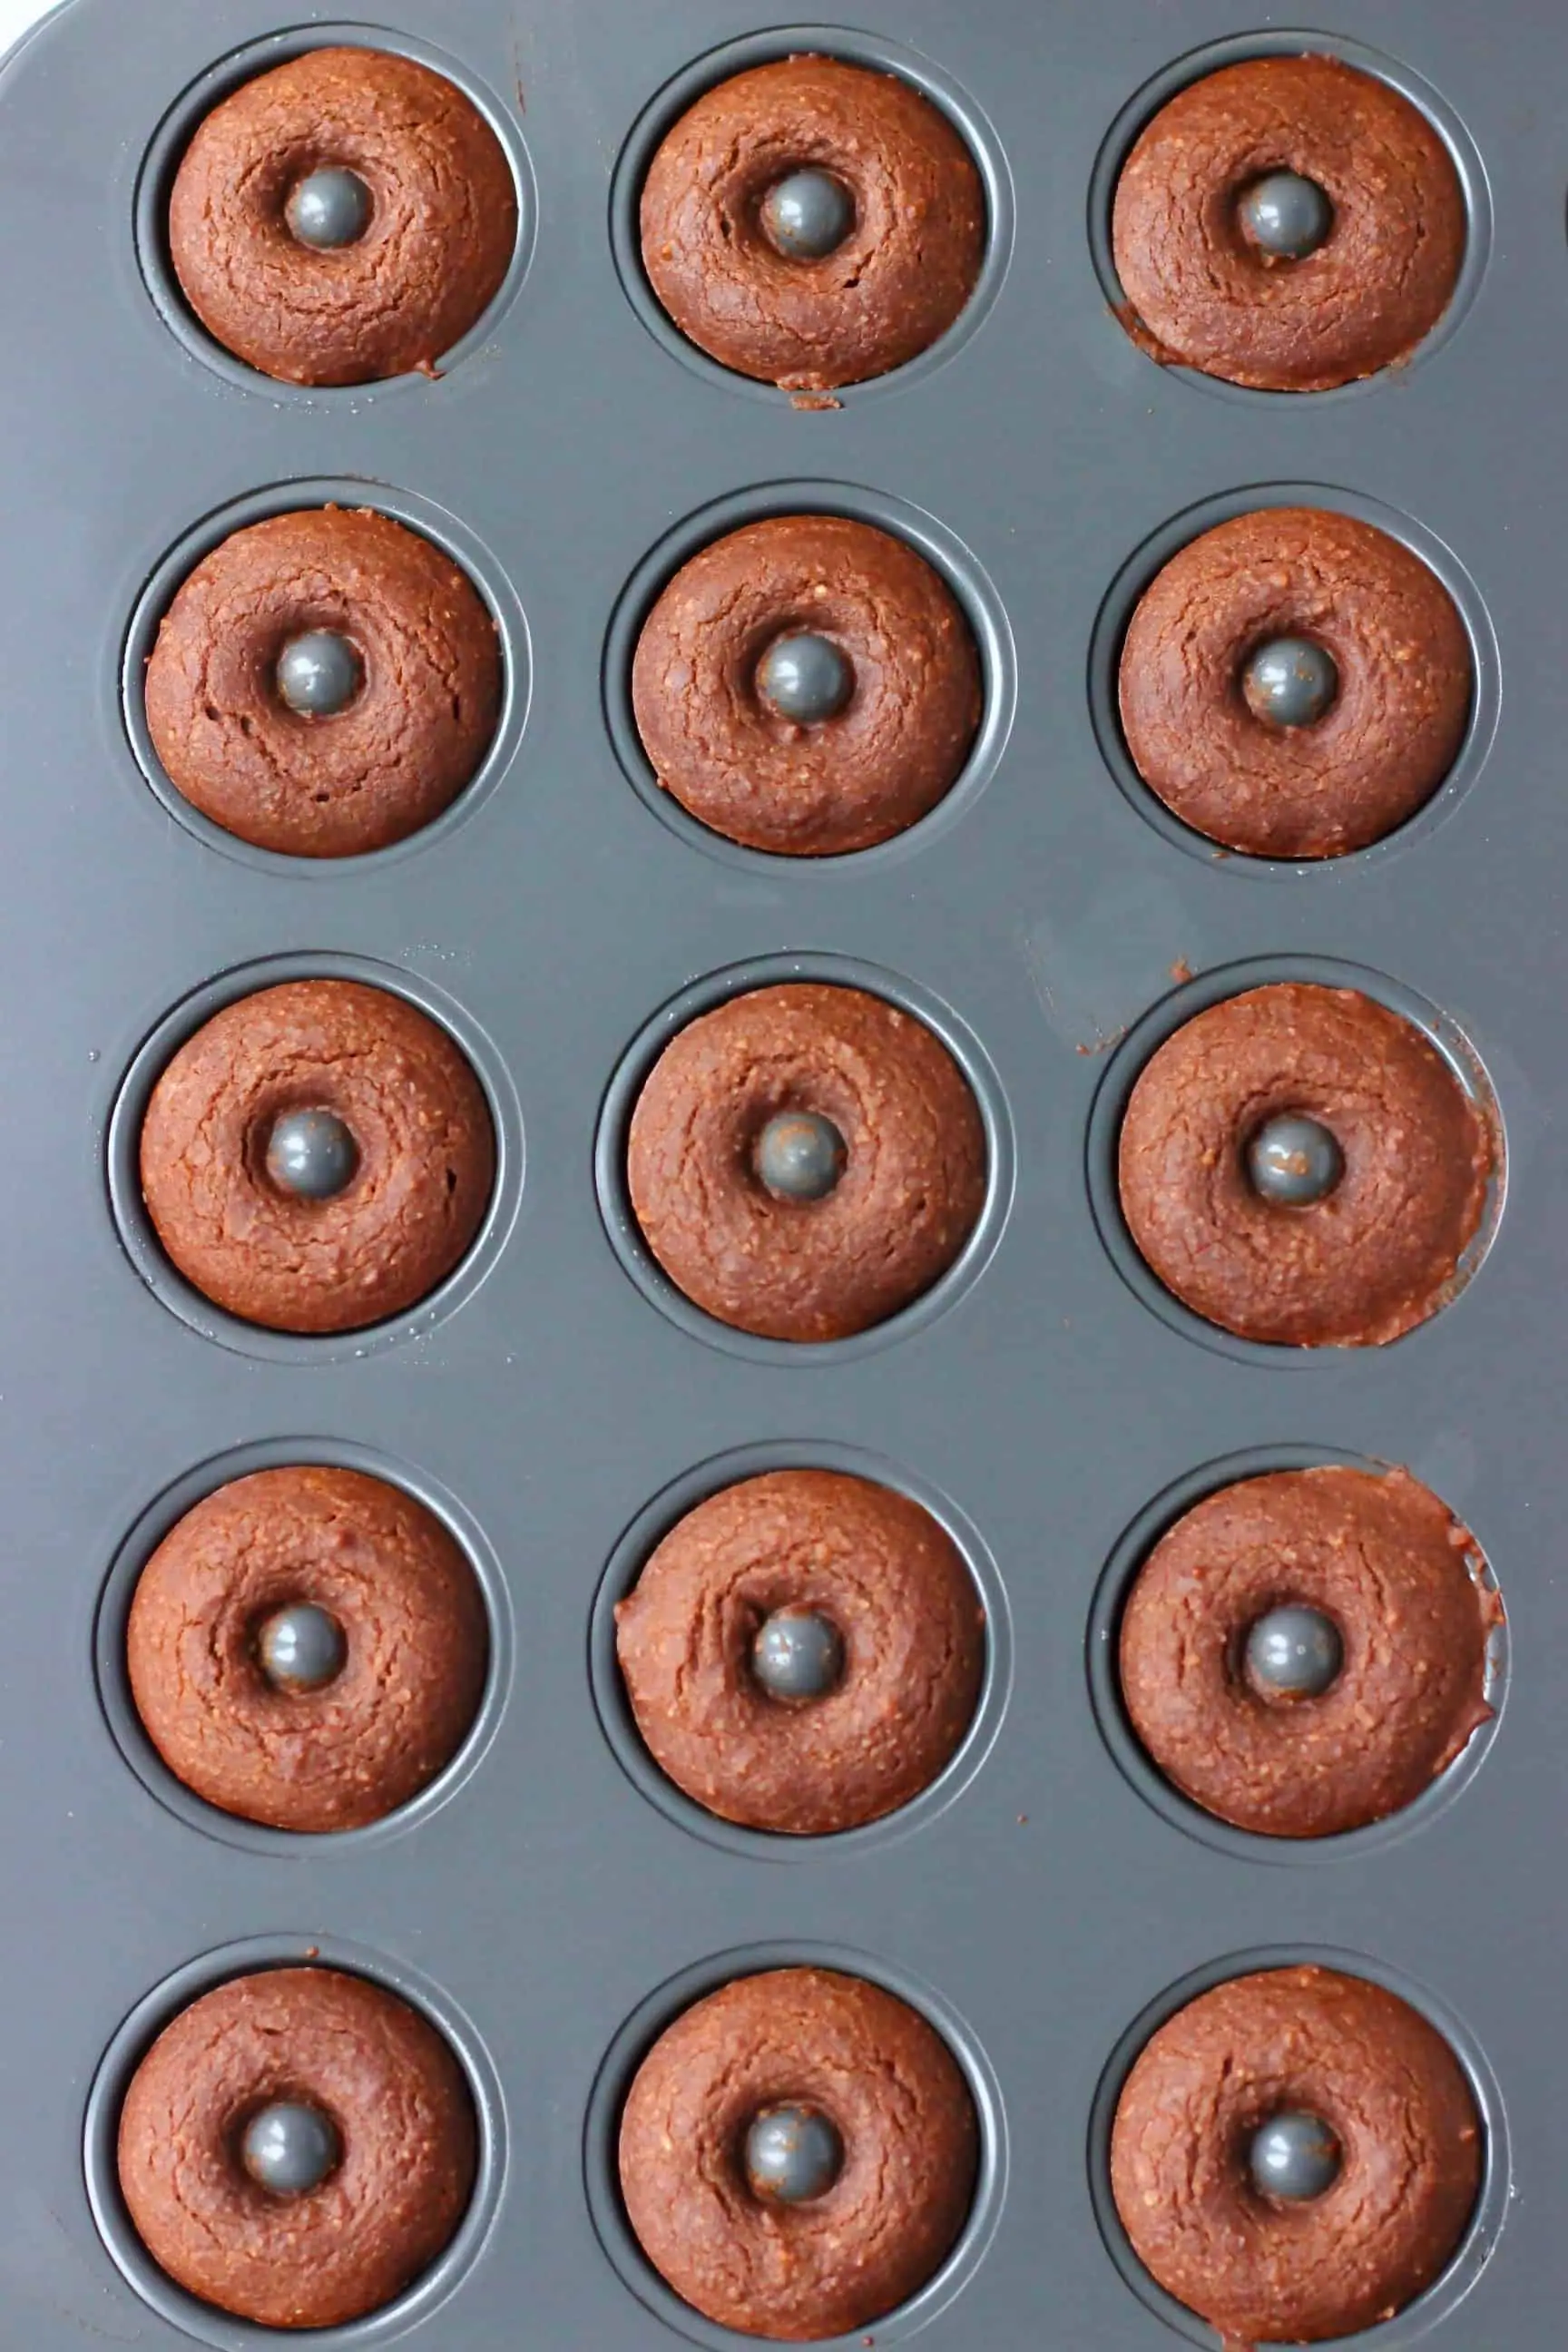 Cooked chocolate donuts in a mini donut tin